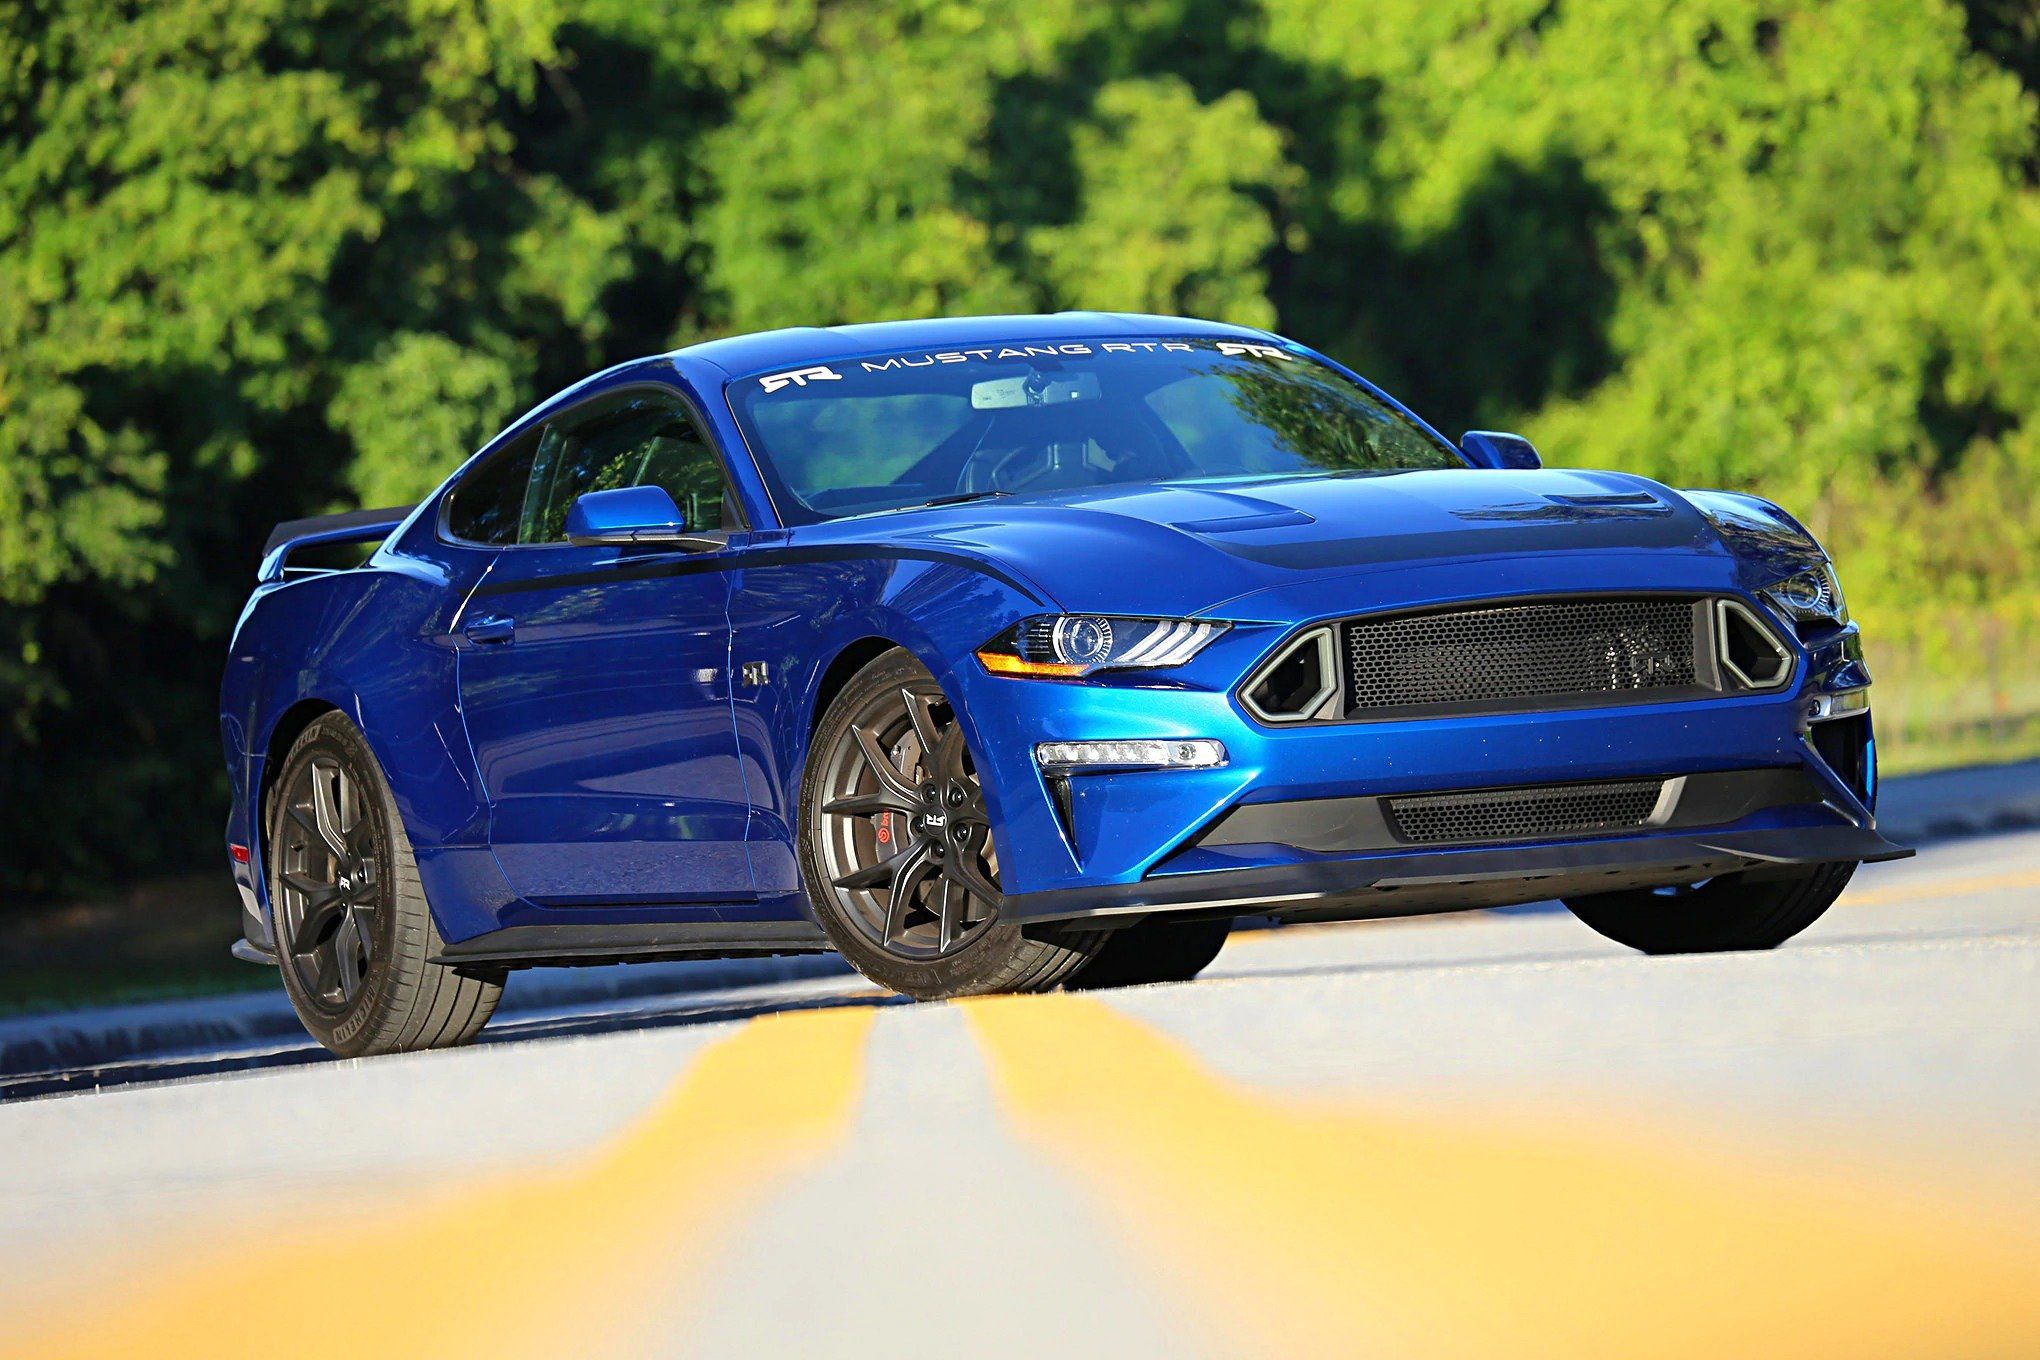 We drove the Series 1 Mustang RTR from the Mustang 55th show to Formula Drift and loved every mile of it